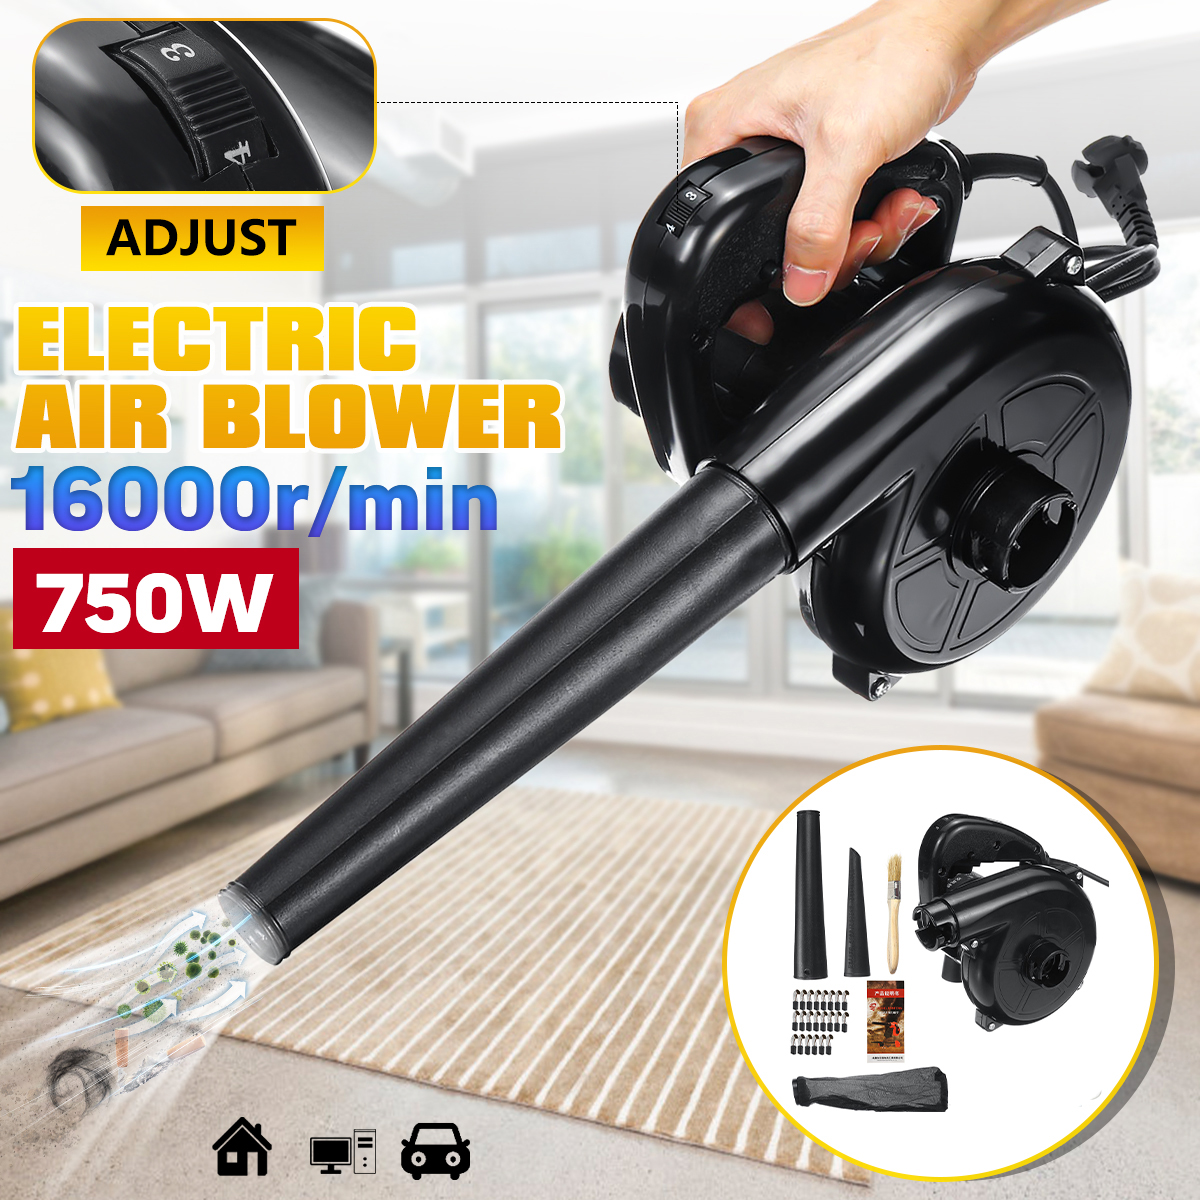 750W-Electric-Air-Blower-Vacuum-Computer-Dust-Collector-Computer-Cleaner-1707480-1